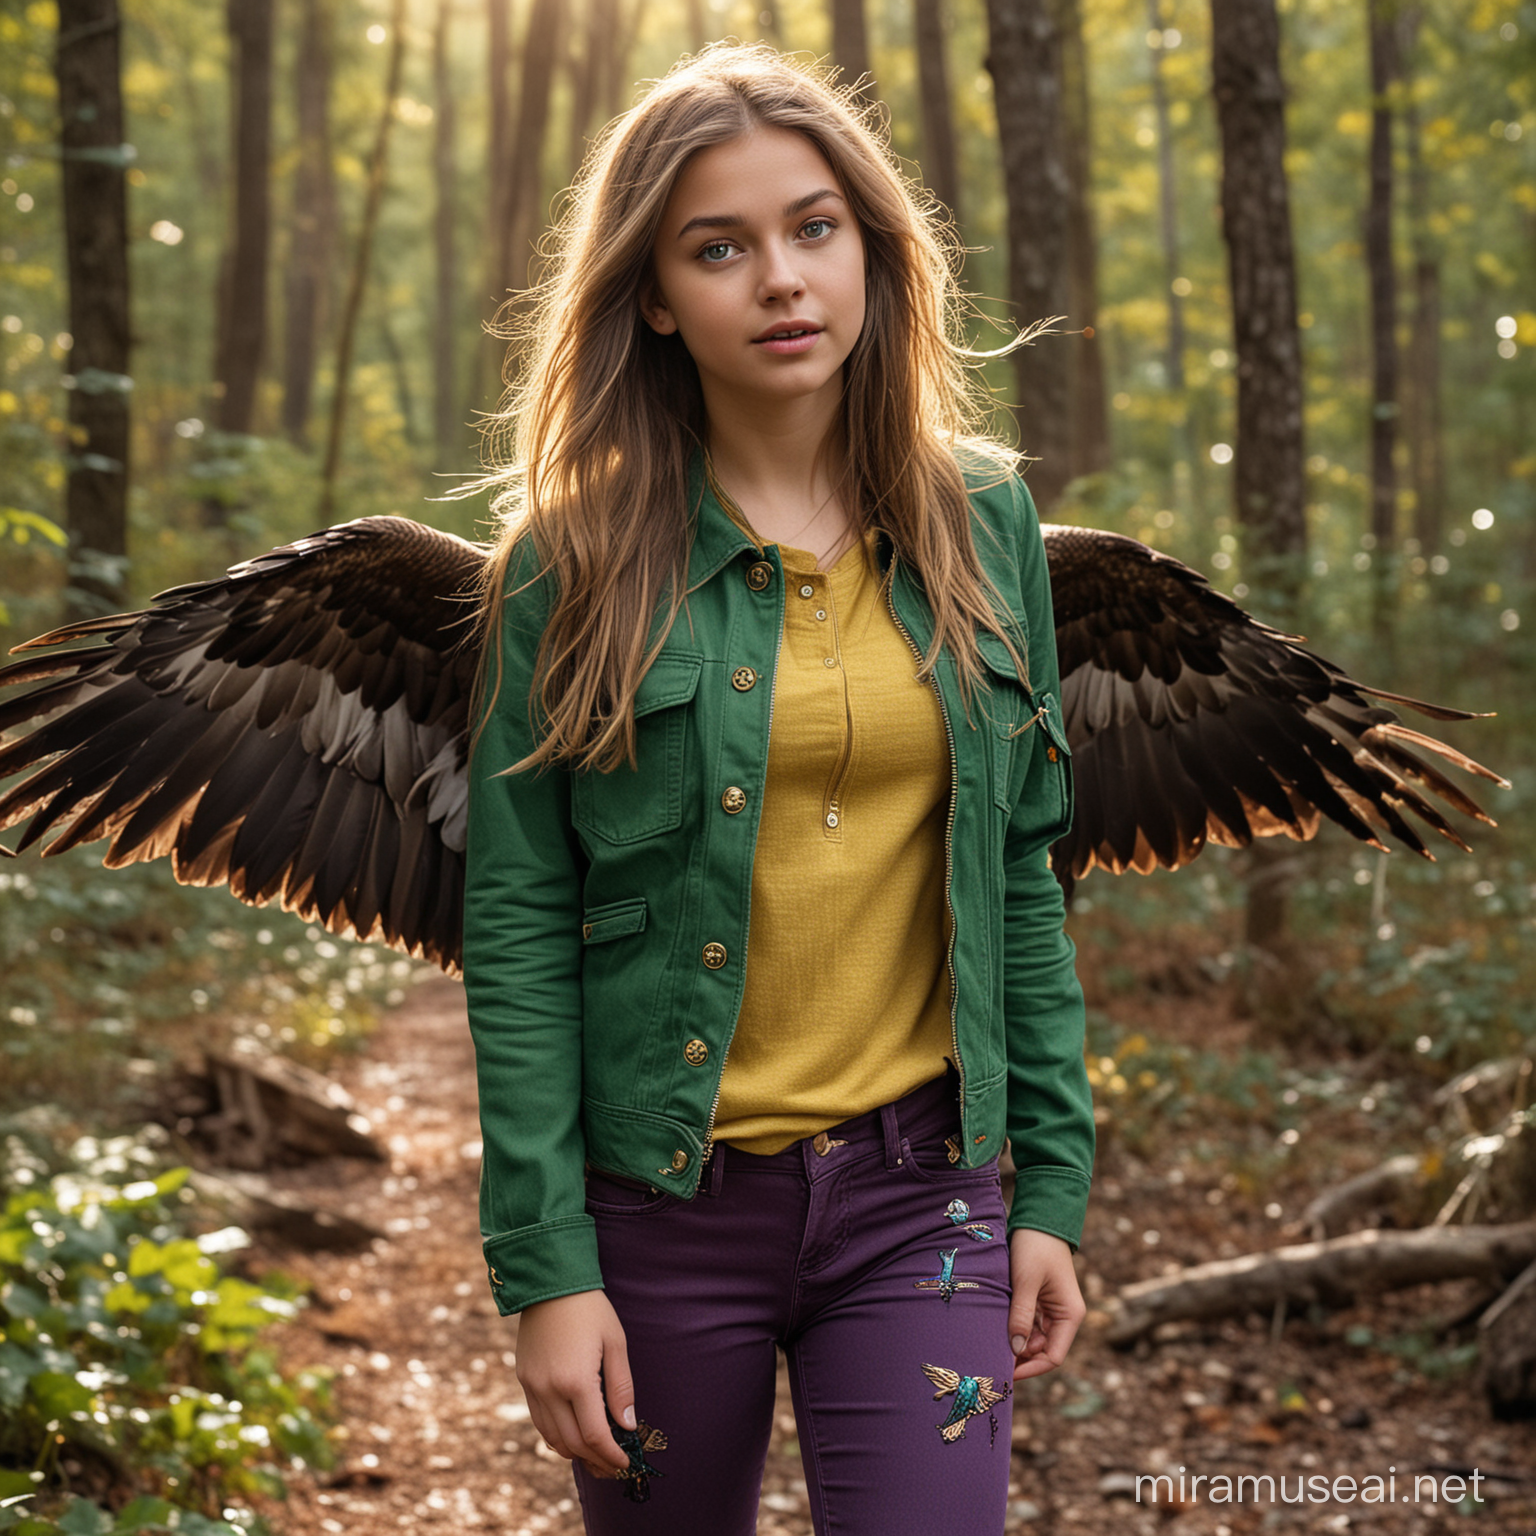 young girl with purple waist long hair wearing forest green jeans with knee patches and a slightly bright emerald green top. Emerald green eyes. wearing a merging shade of green jacket with purple elbow packets on the jacket. The jacket has a golden zipper and decorated with gold stud. She is flying on the back of a wedgetail eagle over the woods with a sunset behind. Mystical style
